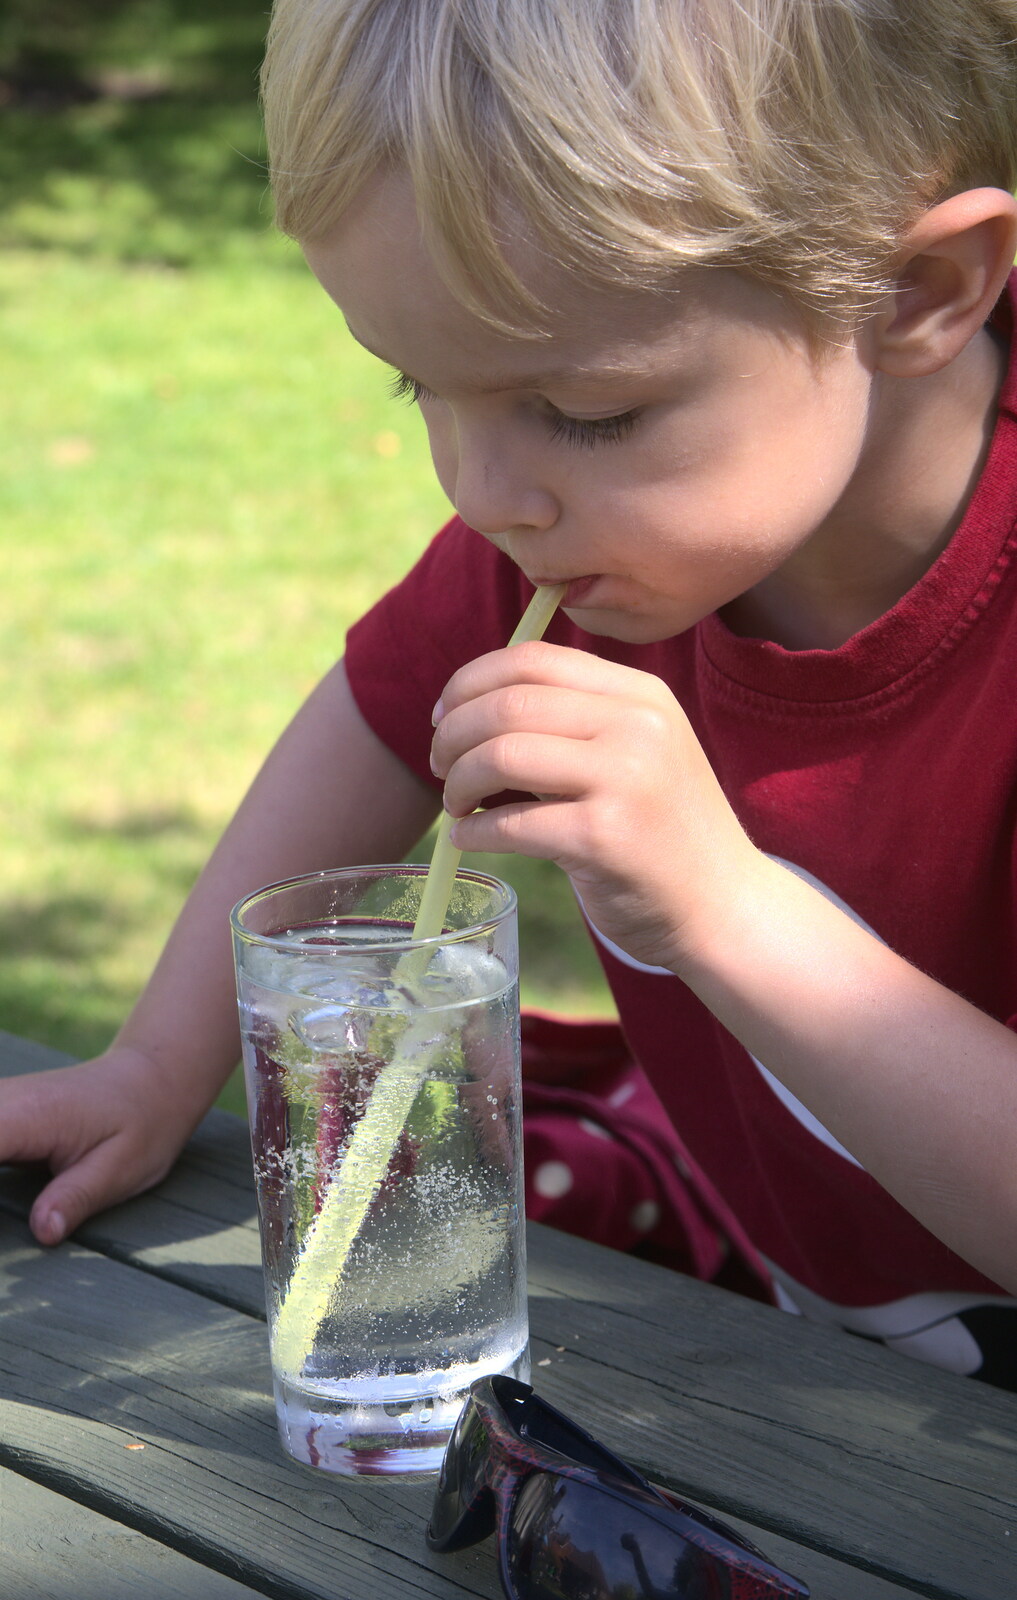 Harry slurps lemonade from The Archaeology of Dunwich: A Camping Trip, Dunwich, Suffolk - 1st August 2015